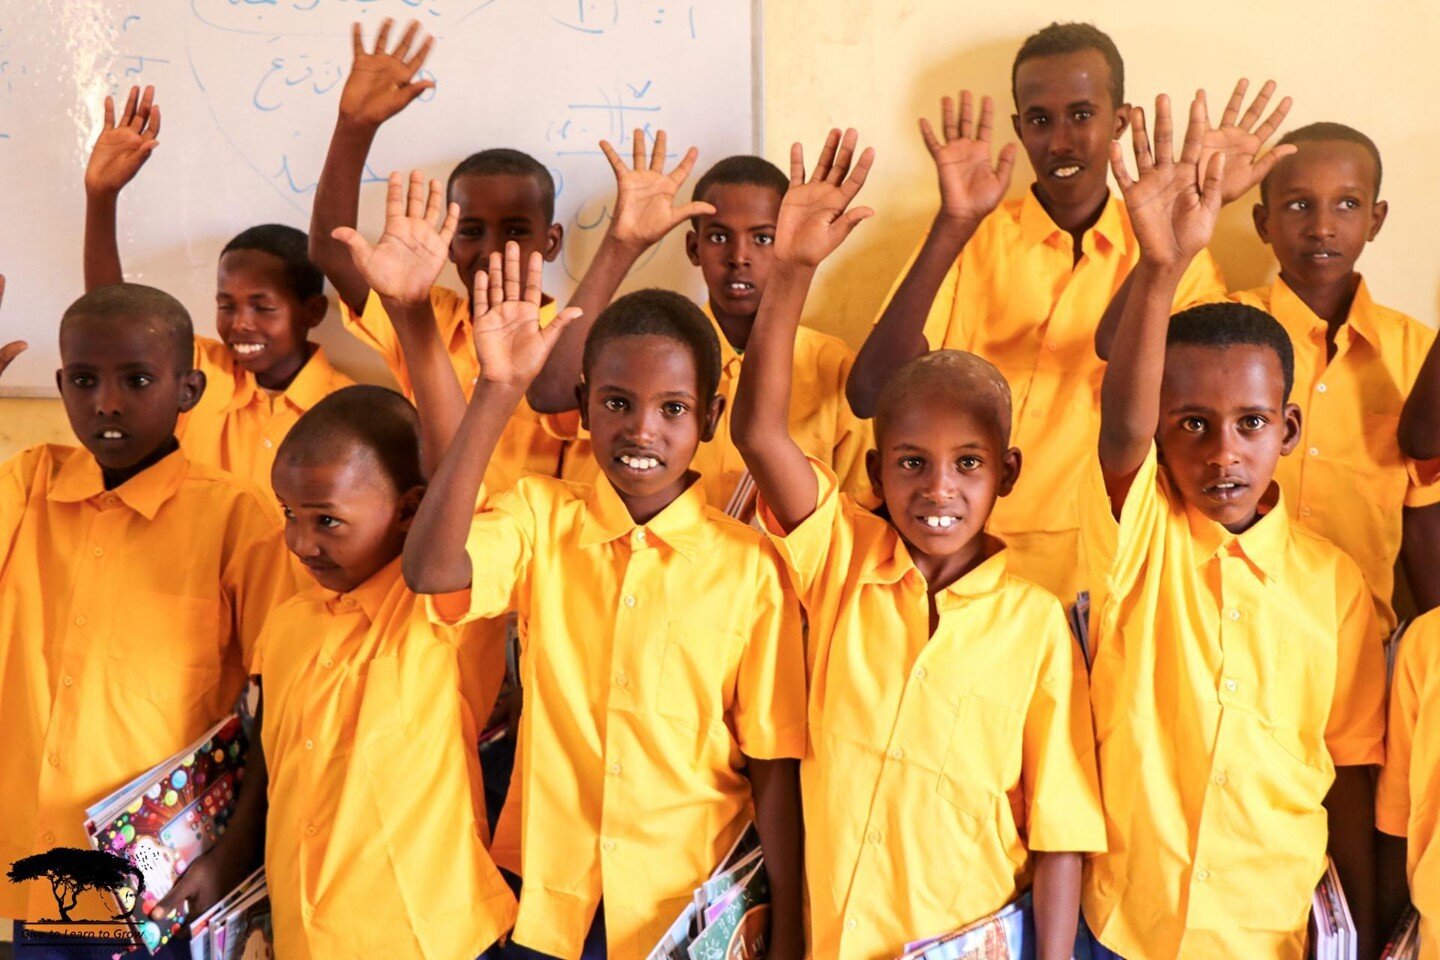 Five days of school done. Happy Friday everyone!!!⁠
⁠
*We are a #nonprofit organization dedicated to providing free education to underprivileged children in #Eastafrica.⁠ If you would like to know more or donate please go to our website at www.giveto